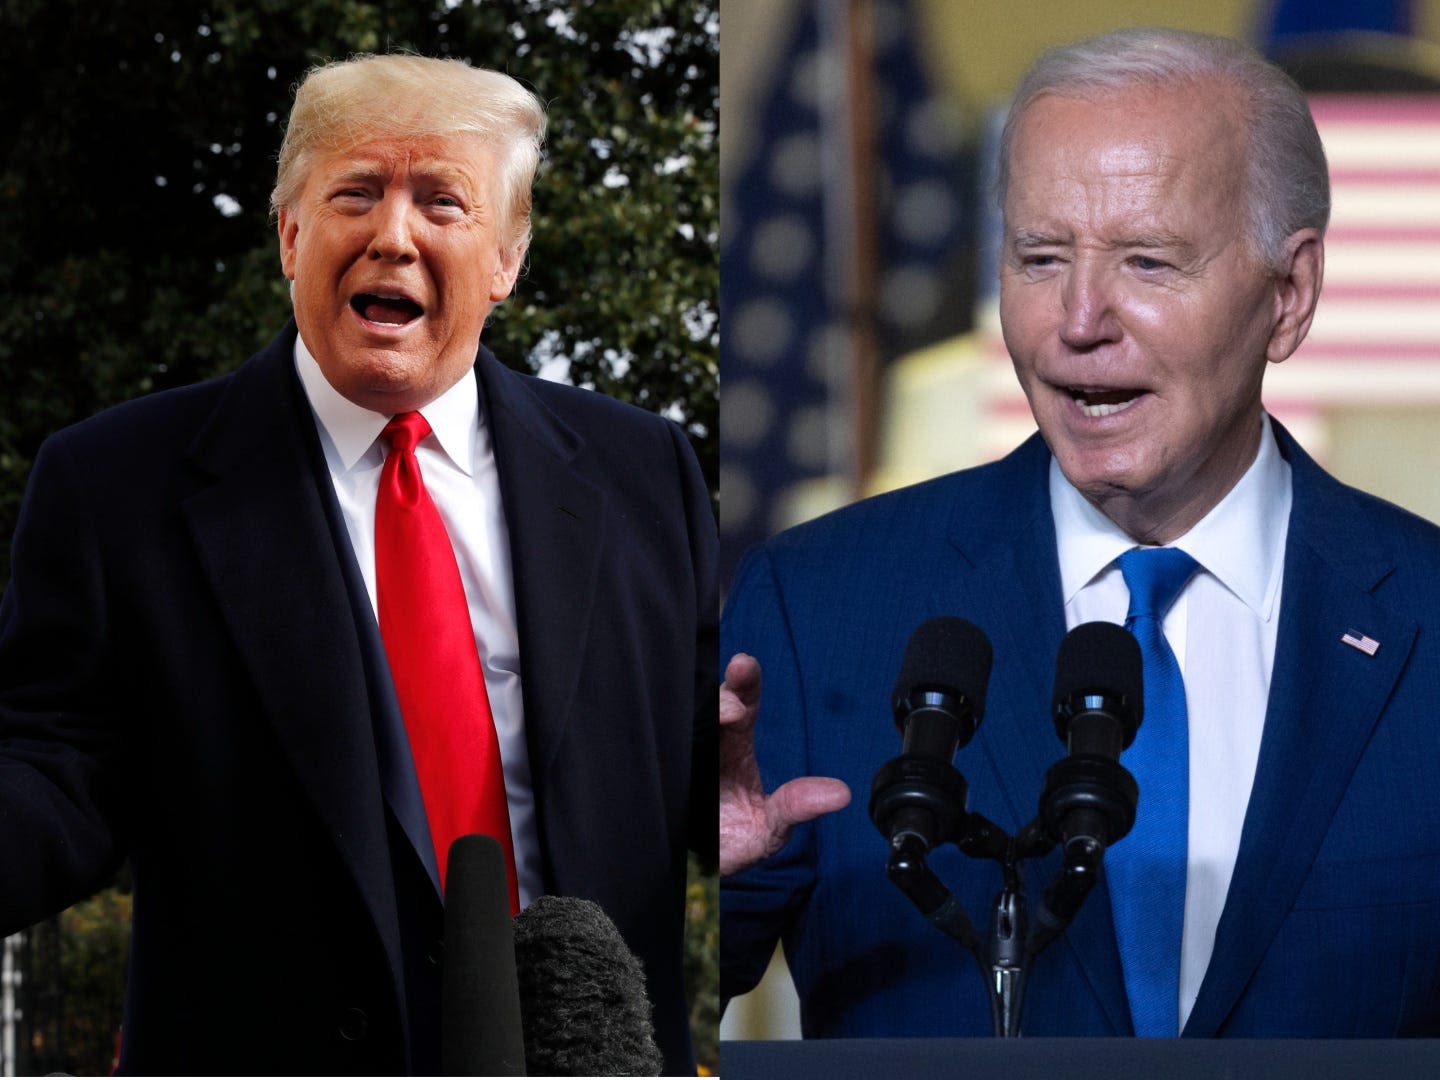 Biden's threat to cut off weapons for Israel isn't the same as what got Trump impeached